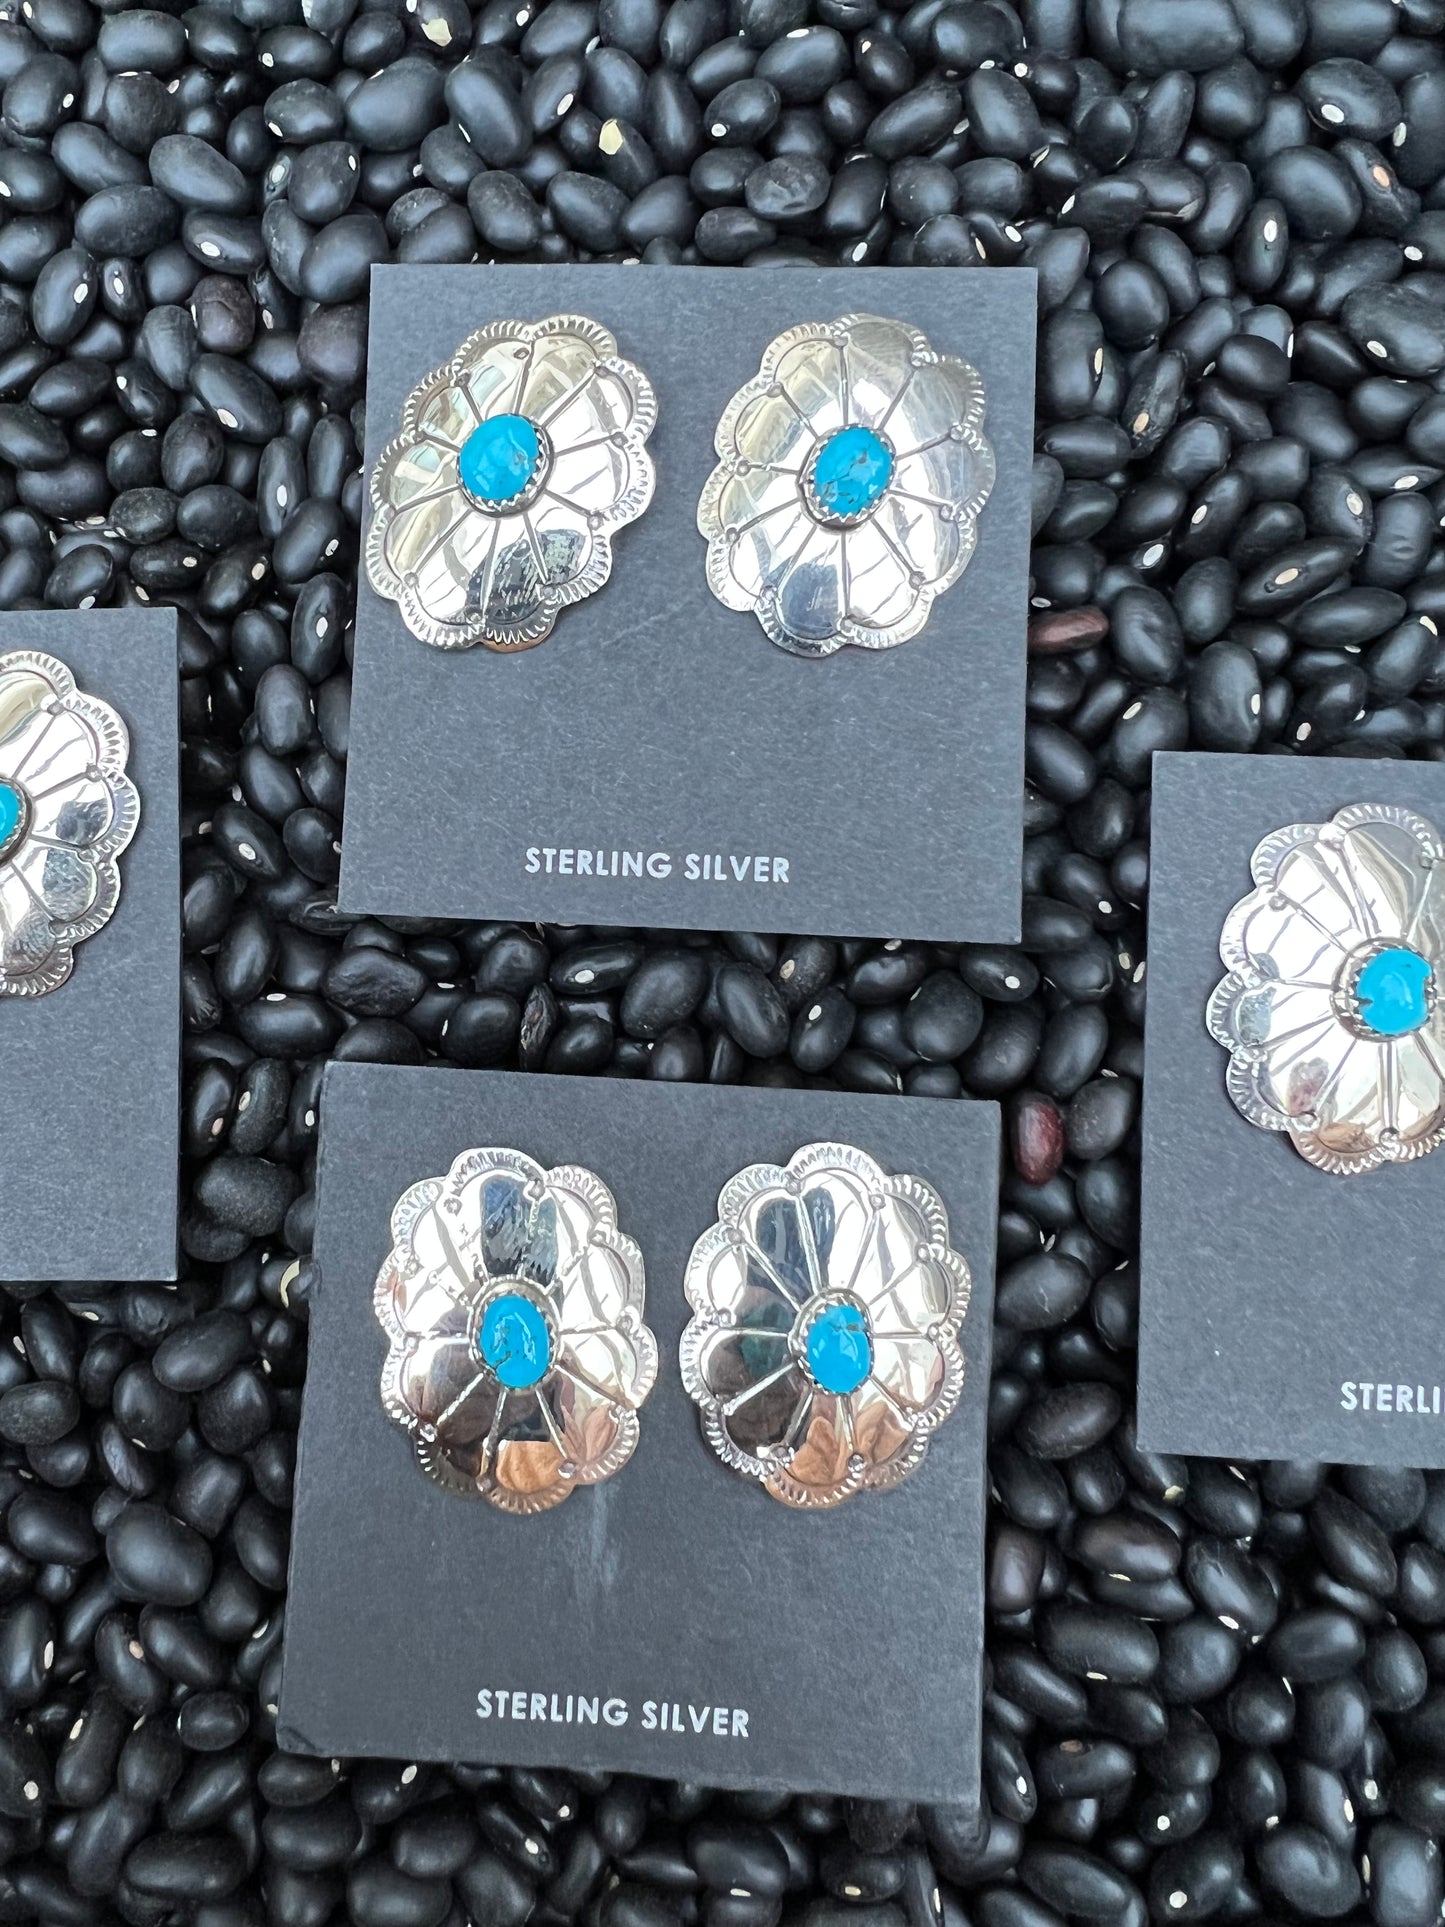 Oblong scallop conchos with turquoise Nuggets